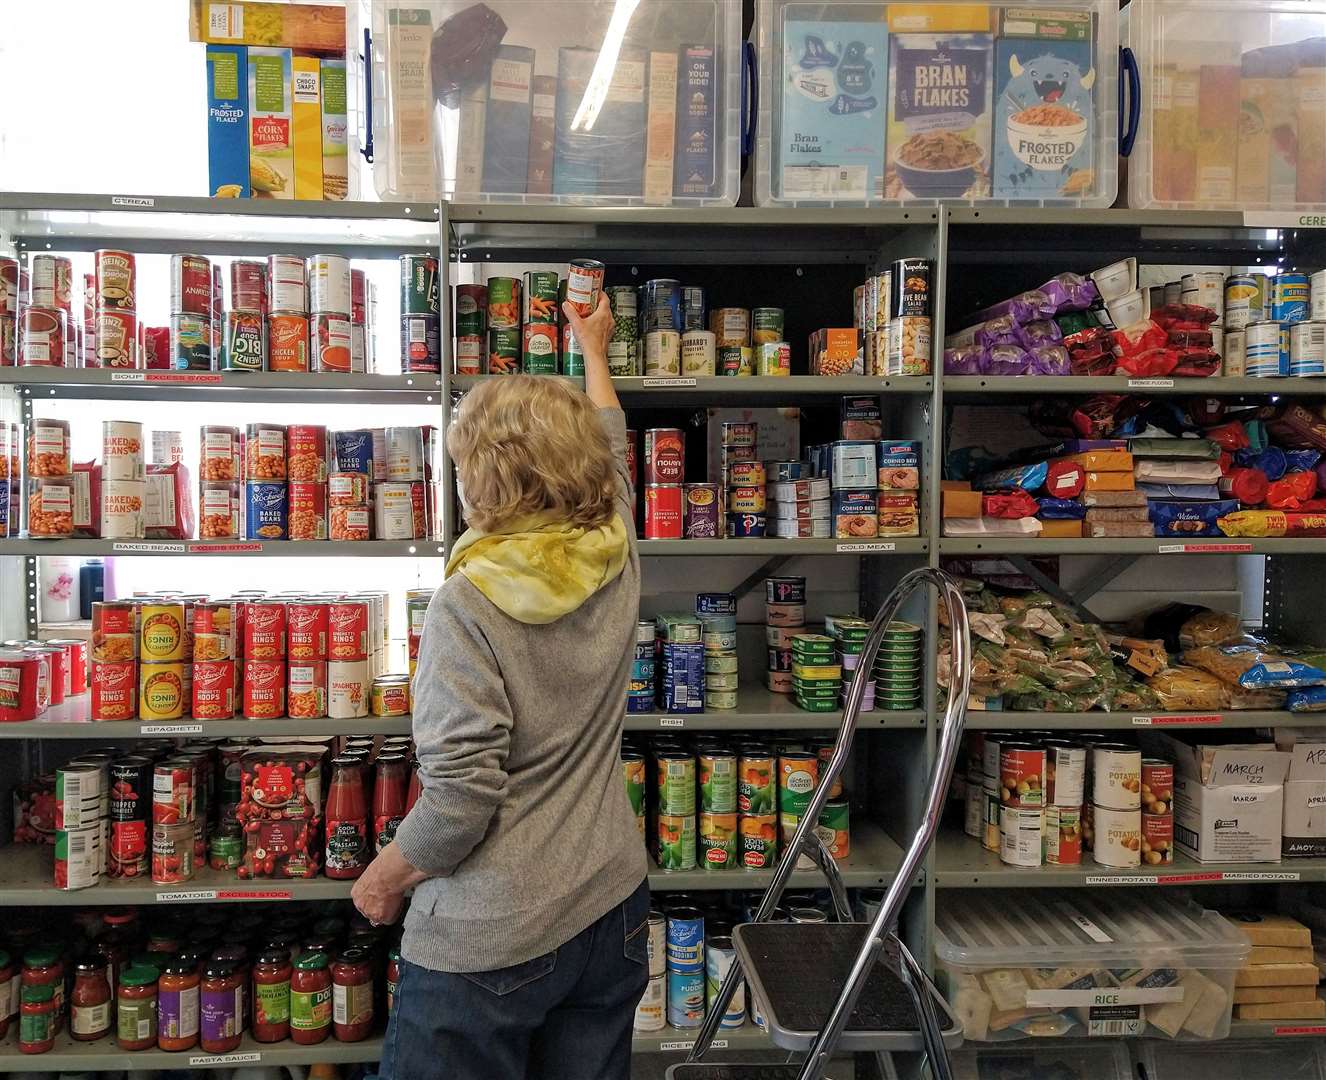 A camera-shy volunteer is adding stock to the shelves following a busy session. Pic: Mary Ransom